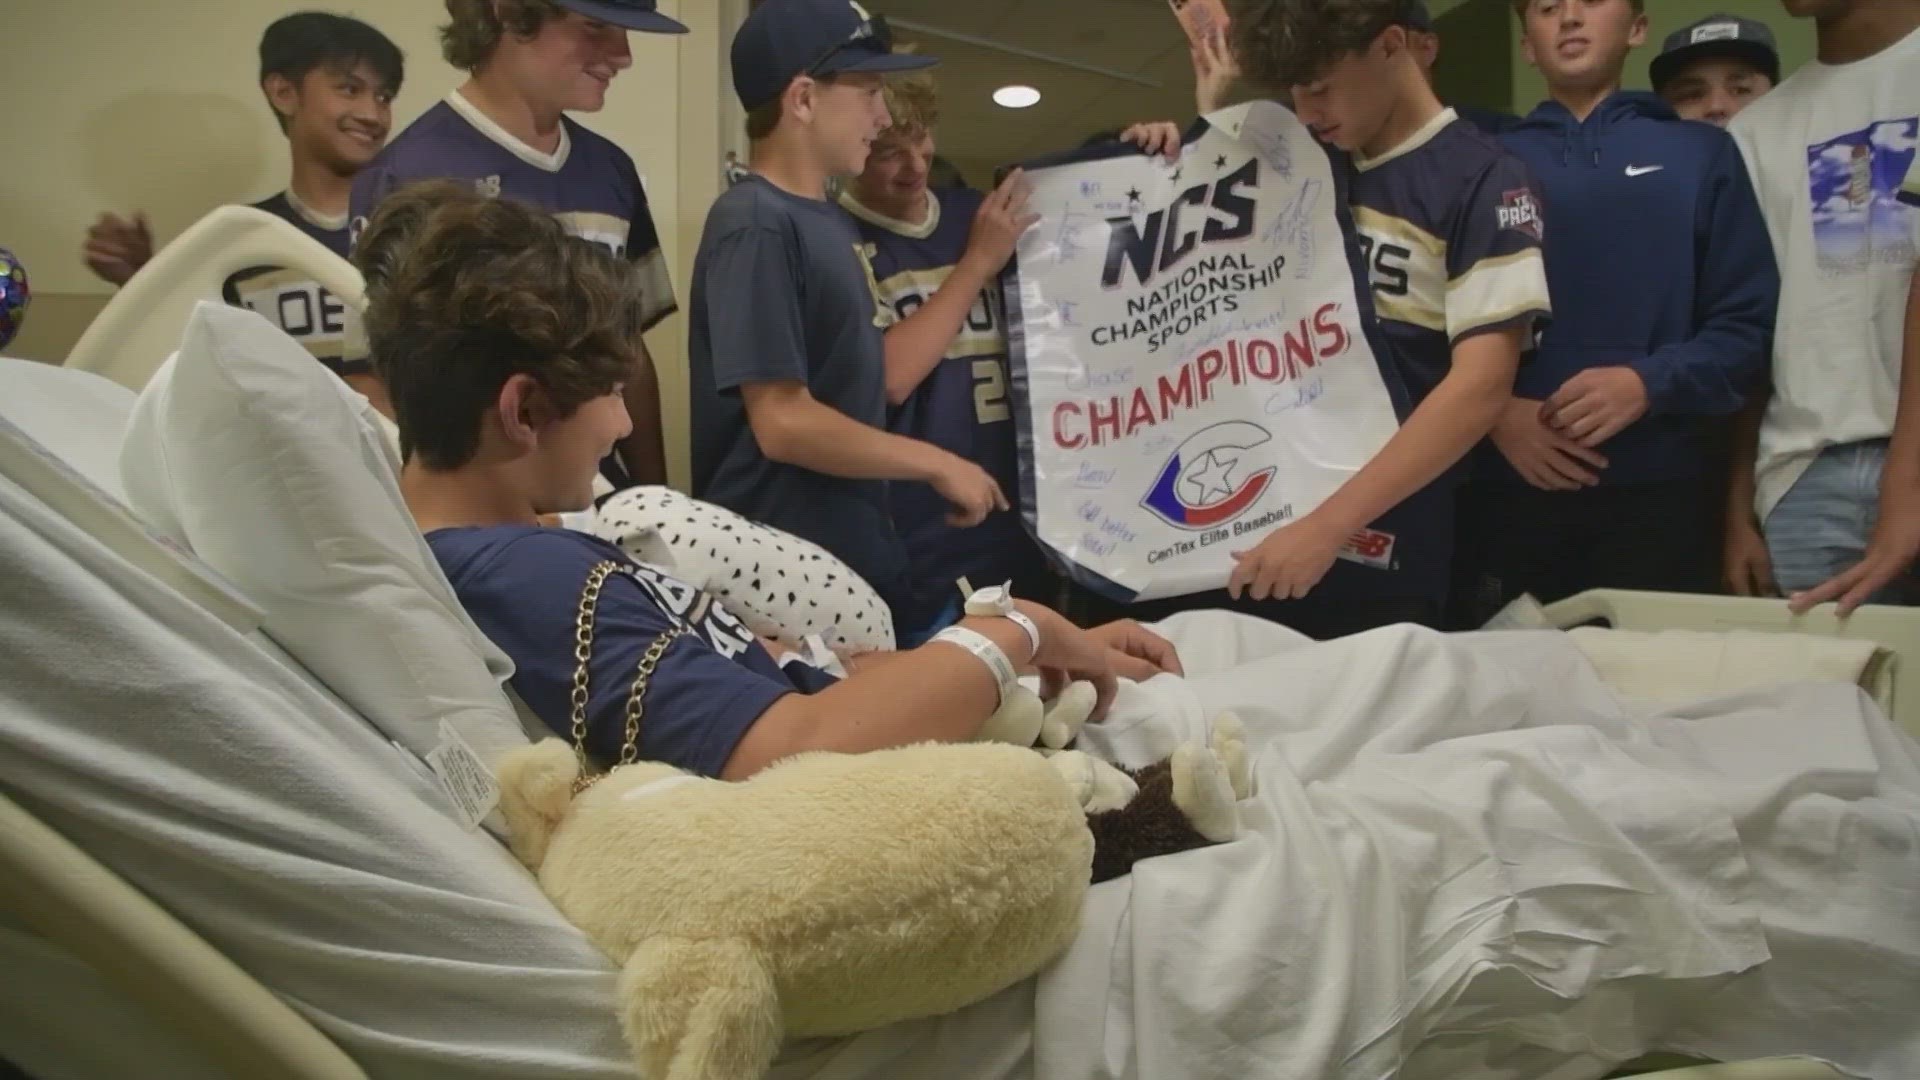 Max Figueroa's friends and teammates visited him in the hospital, brought him his championship ring, and named him their MVP.